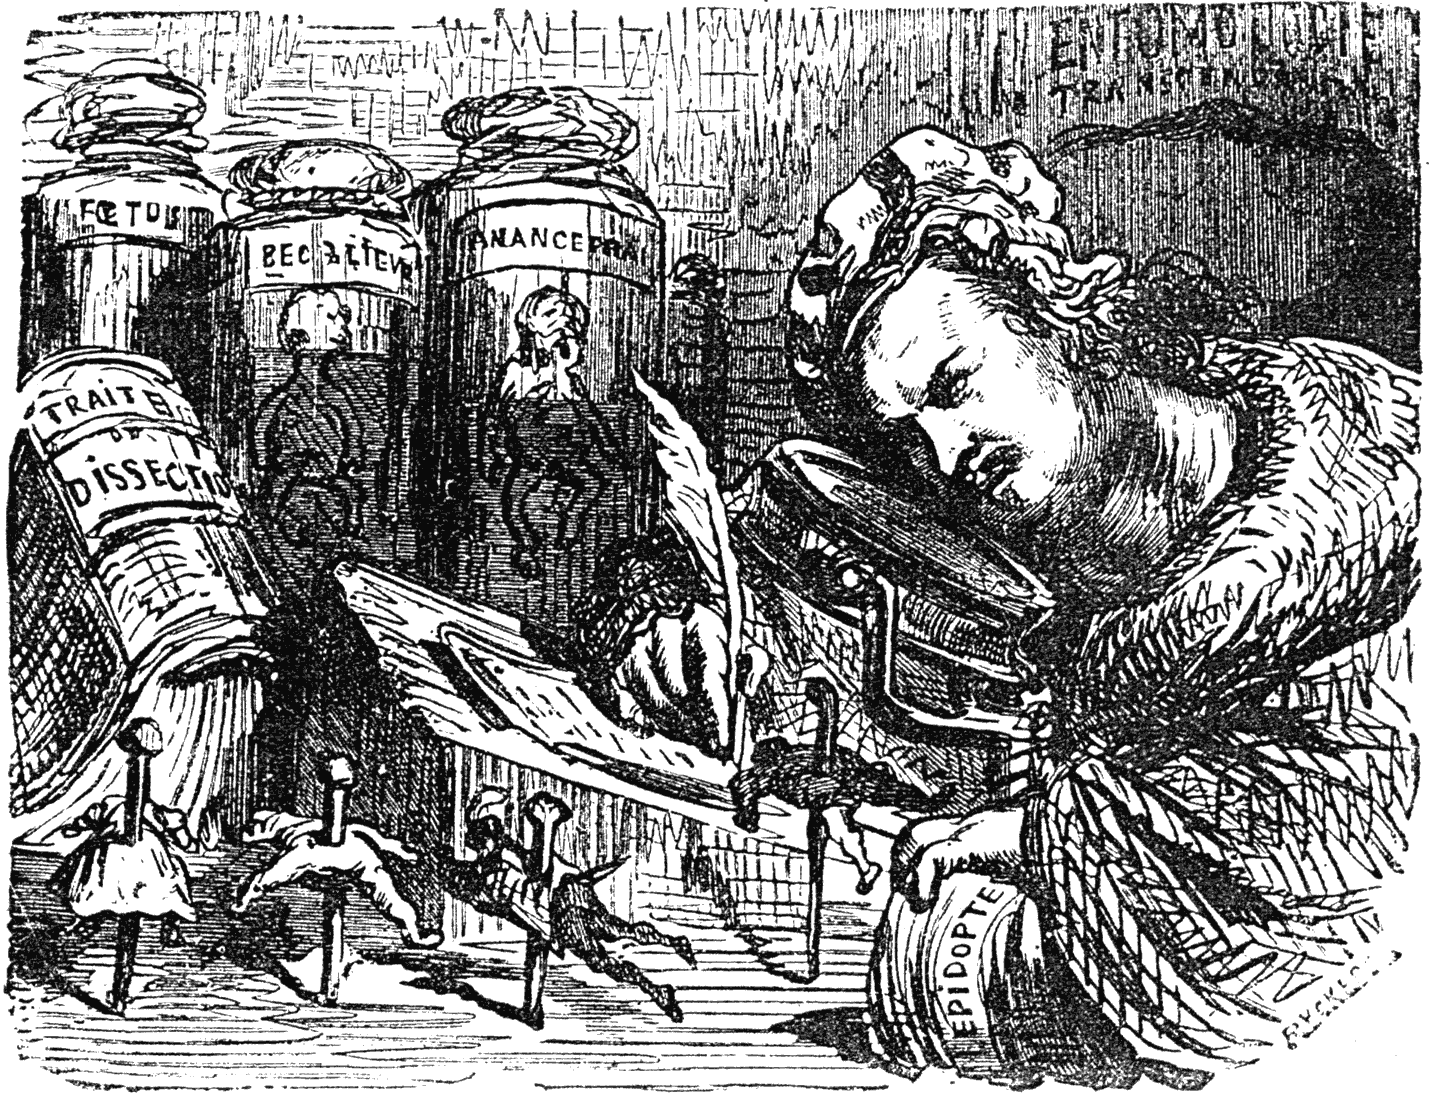 Balzac writing his 'Contes Drolatiques'. Vignette dated 1865 by Gustave Dore (1832-1883). From Henri Bouchot 'The Printed Book' 1887, page 234, published size in Bouchot, 7.8cm wide by 6.1cm high.